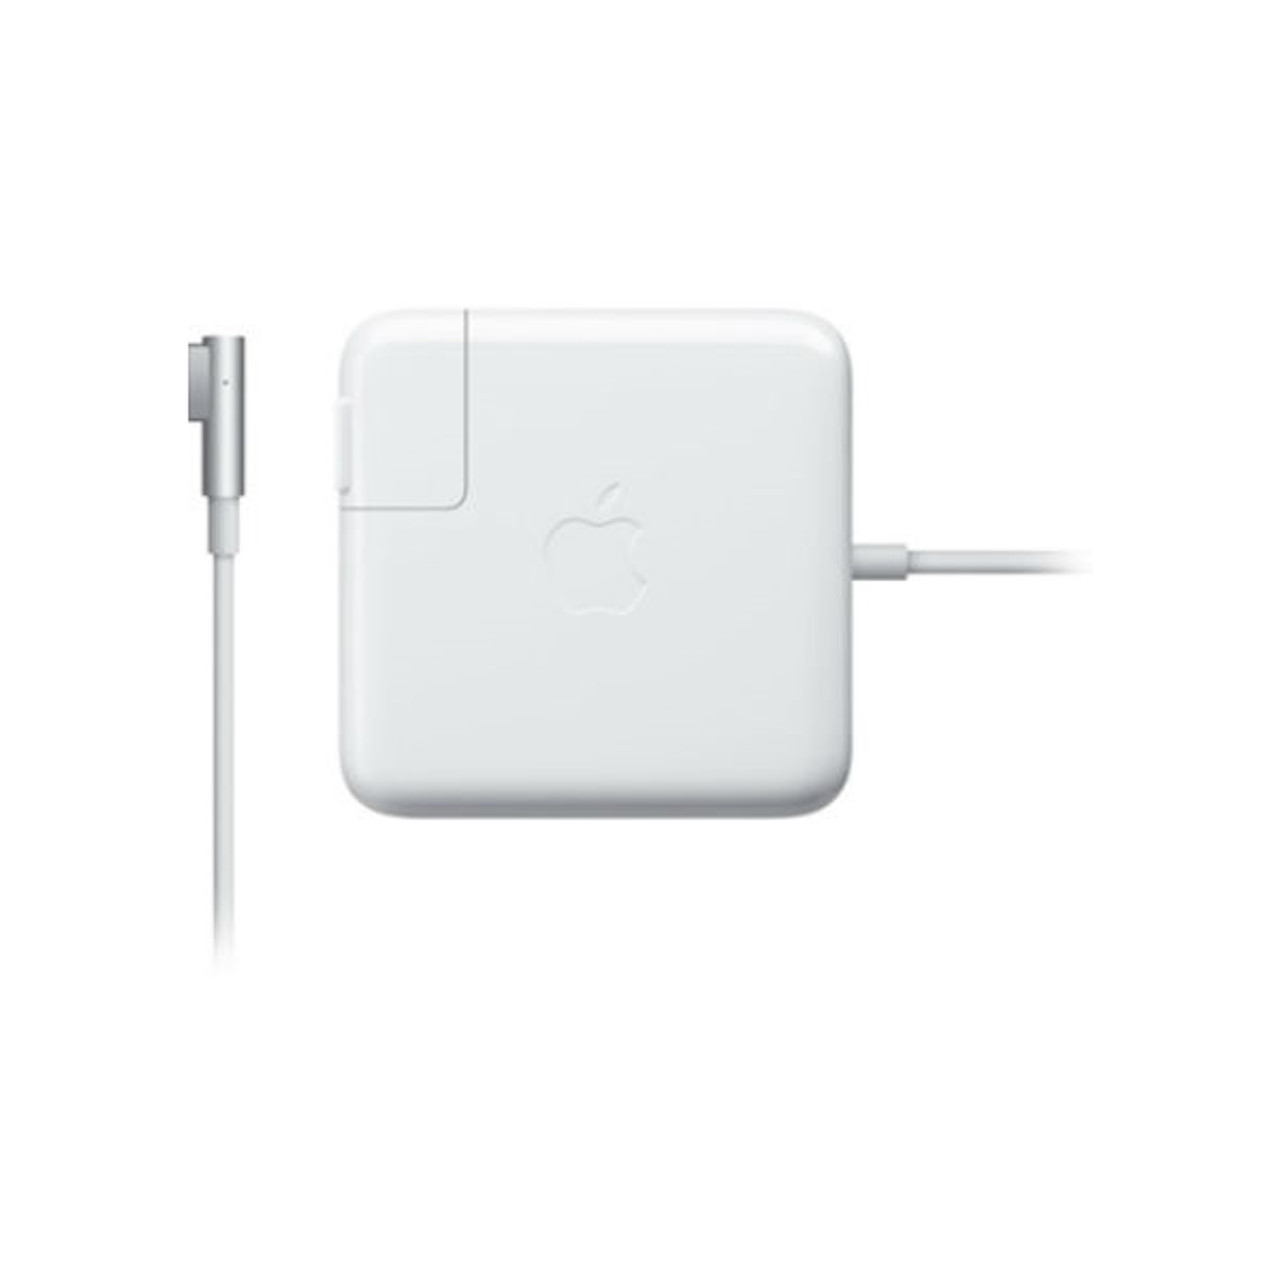 Apple Power Adapter MC461LL/A of all trades